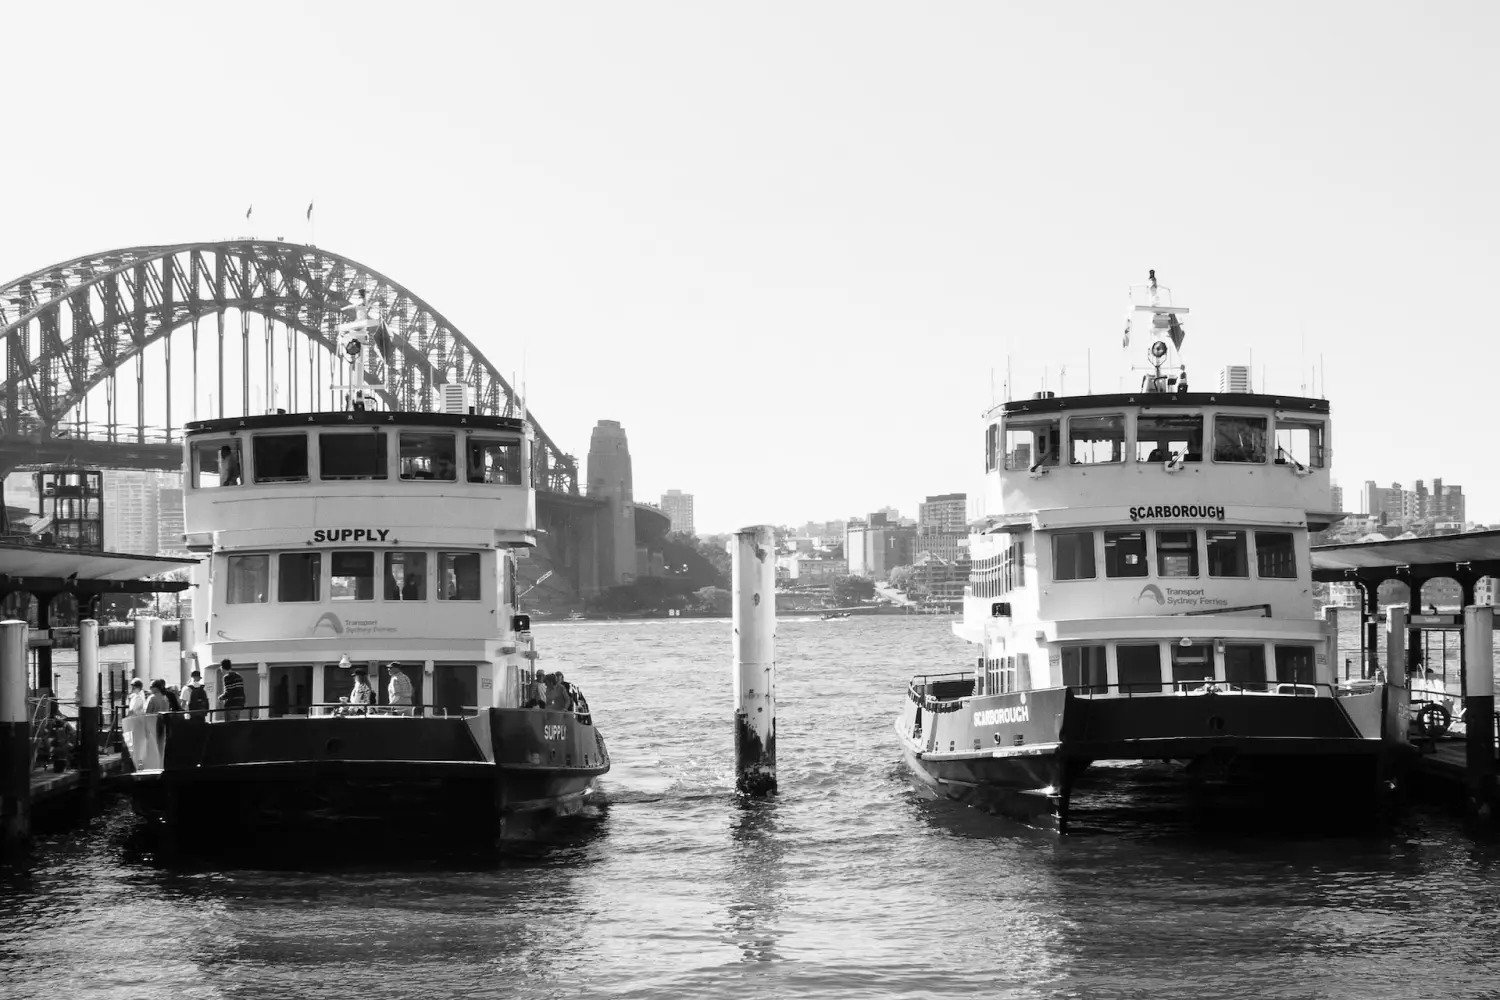 Black and white image of two old river boats docking at the port.